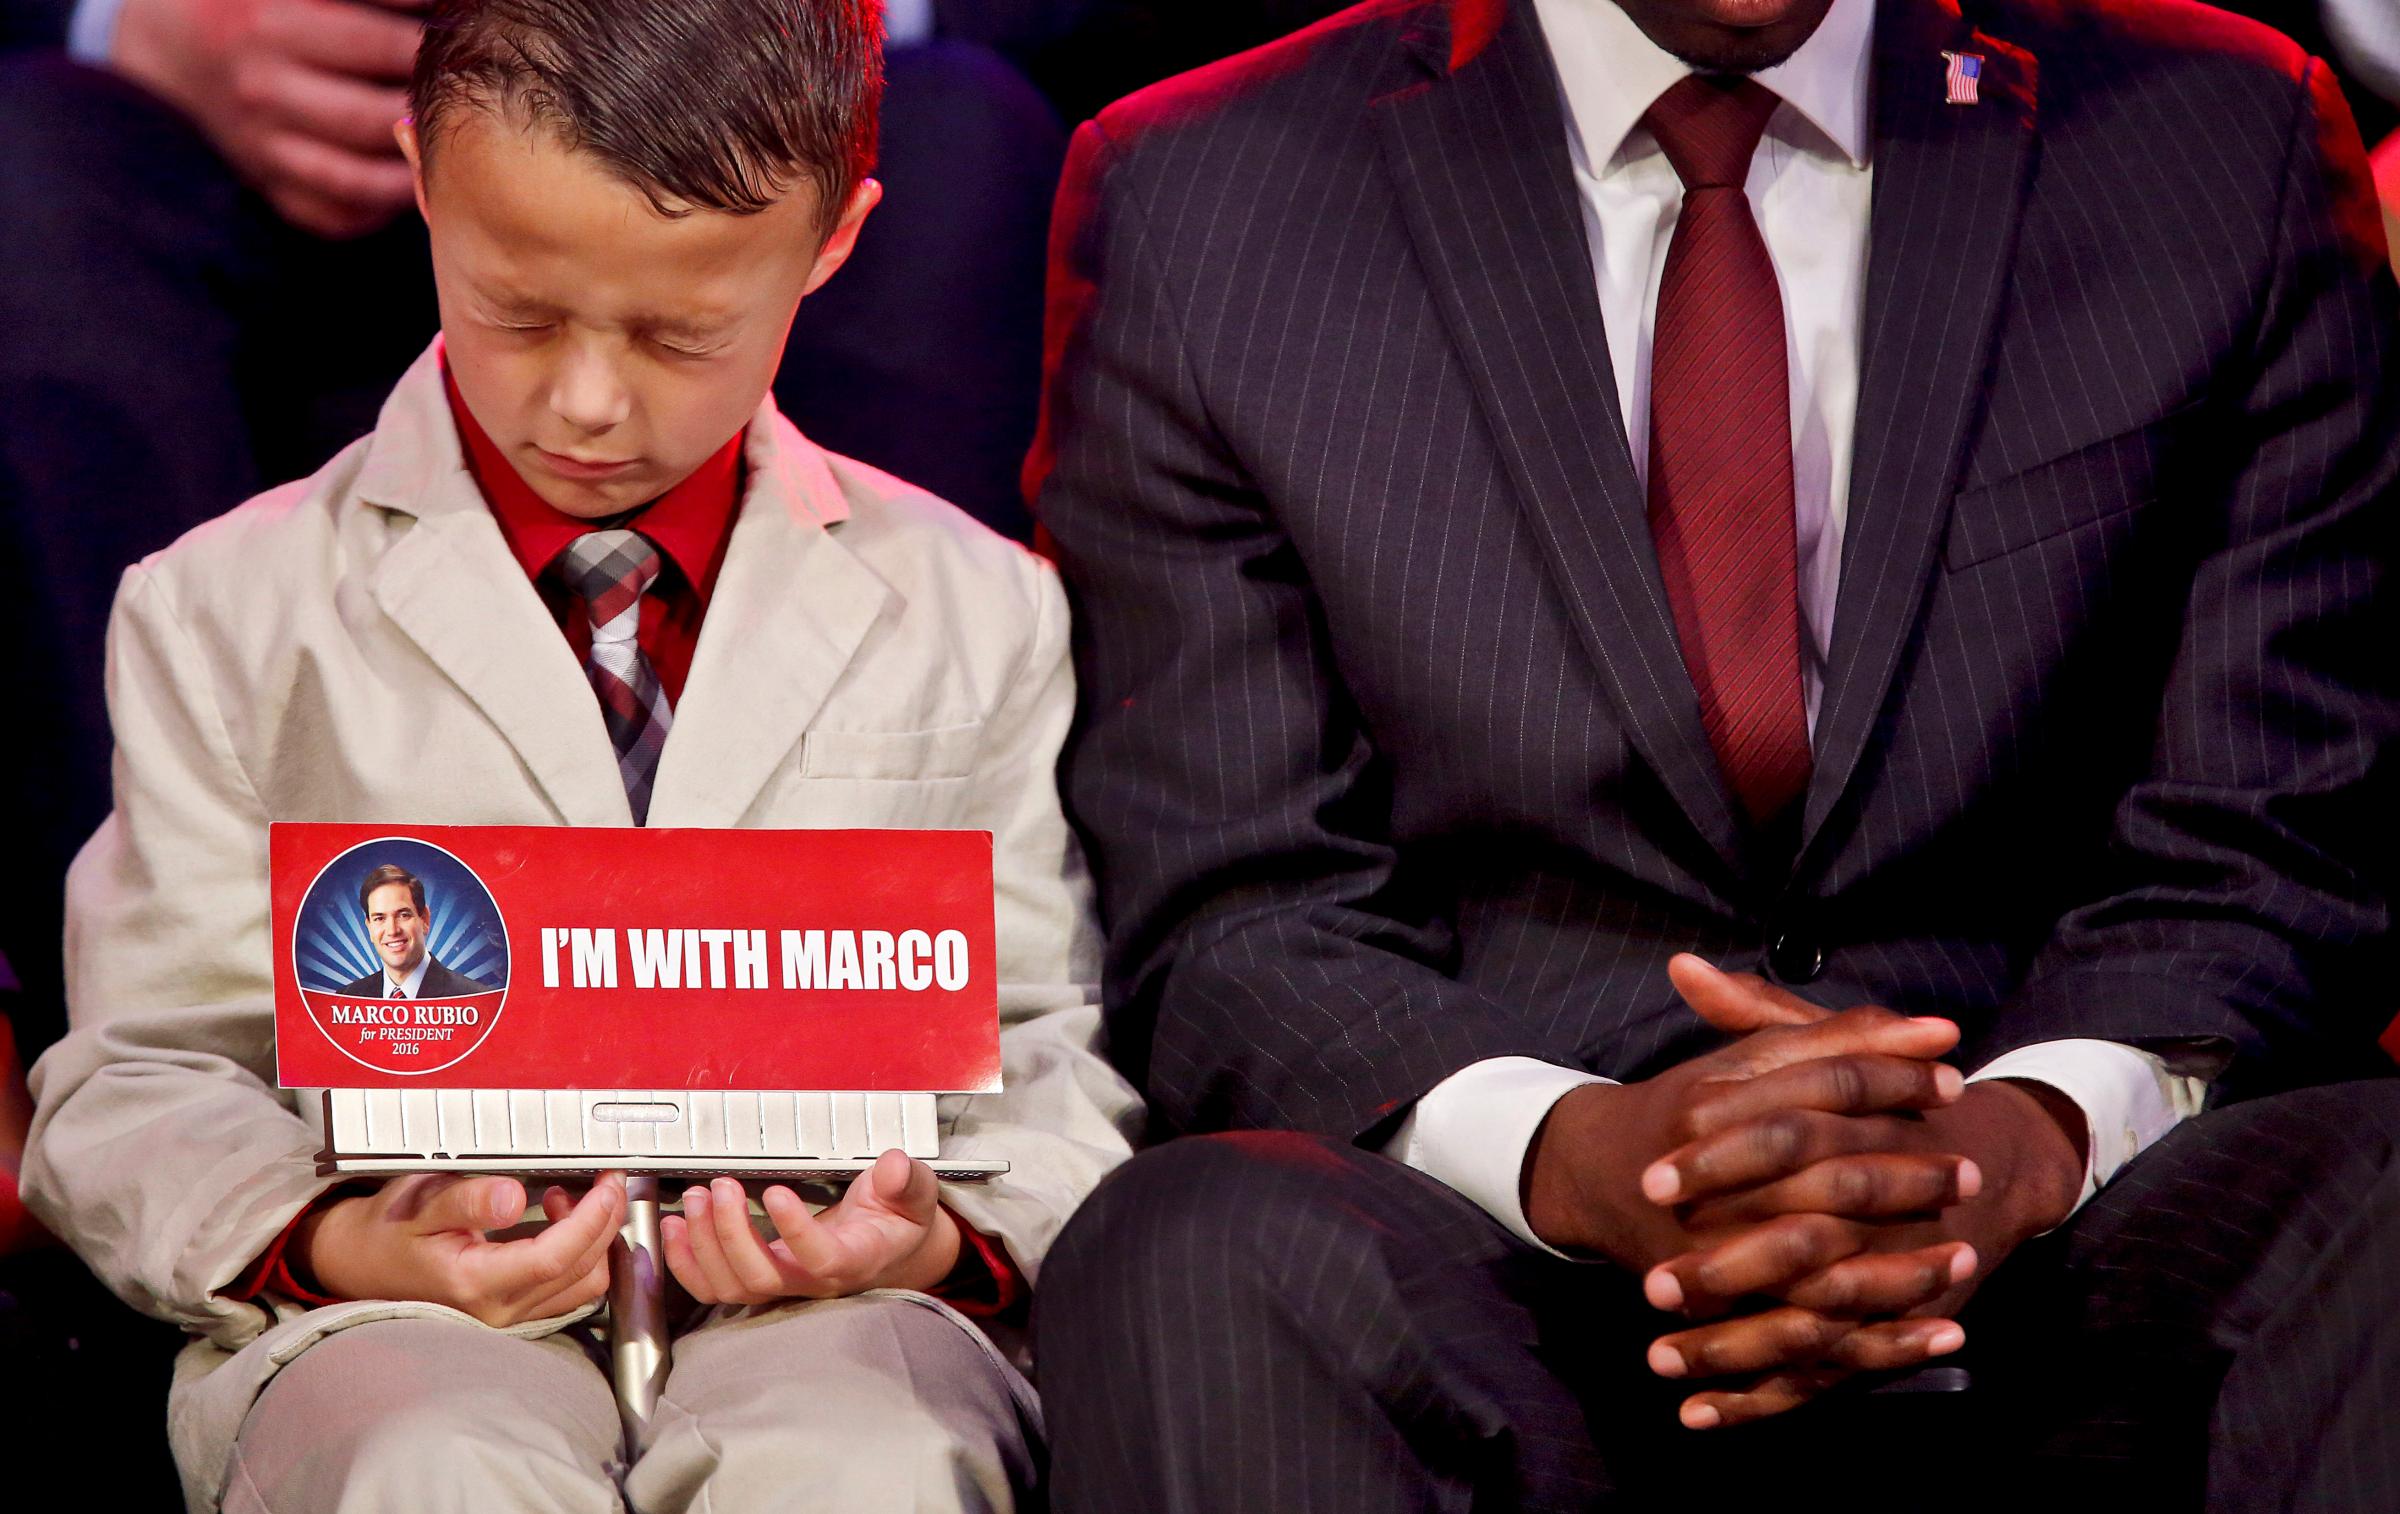 Six-year-old Aiden Thurman, of Hugo, Okla. prays during a campaign stop by Republican presidential candidate Marco Rubio on Feb. 26, 2016, in Oklahoma City.